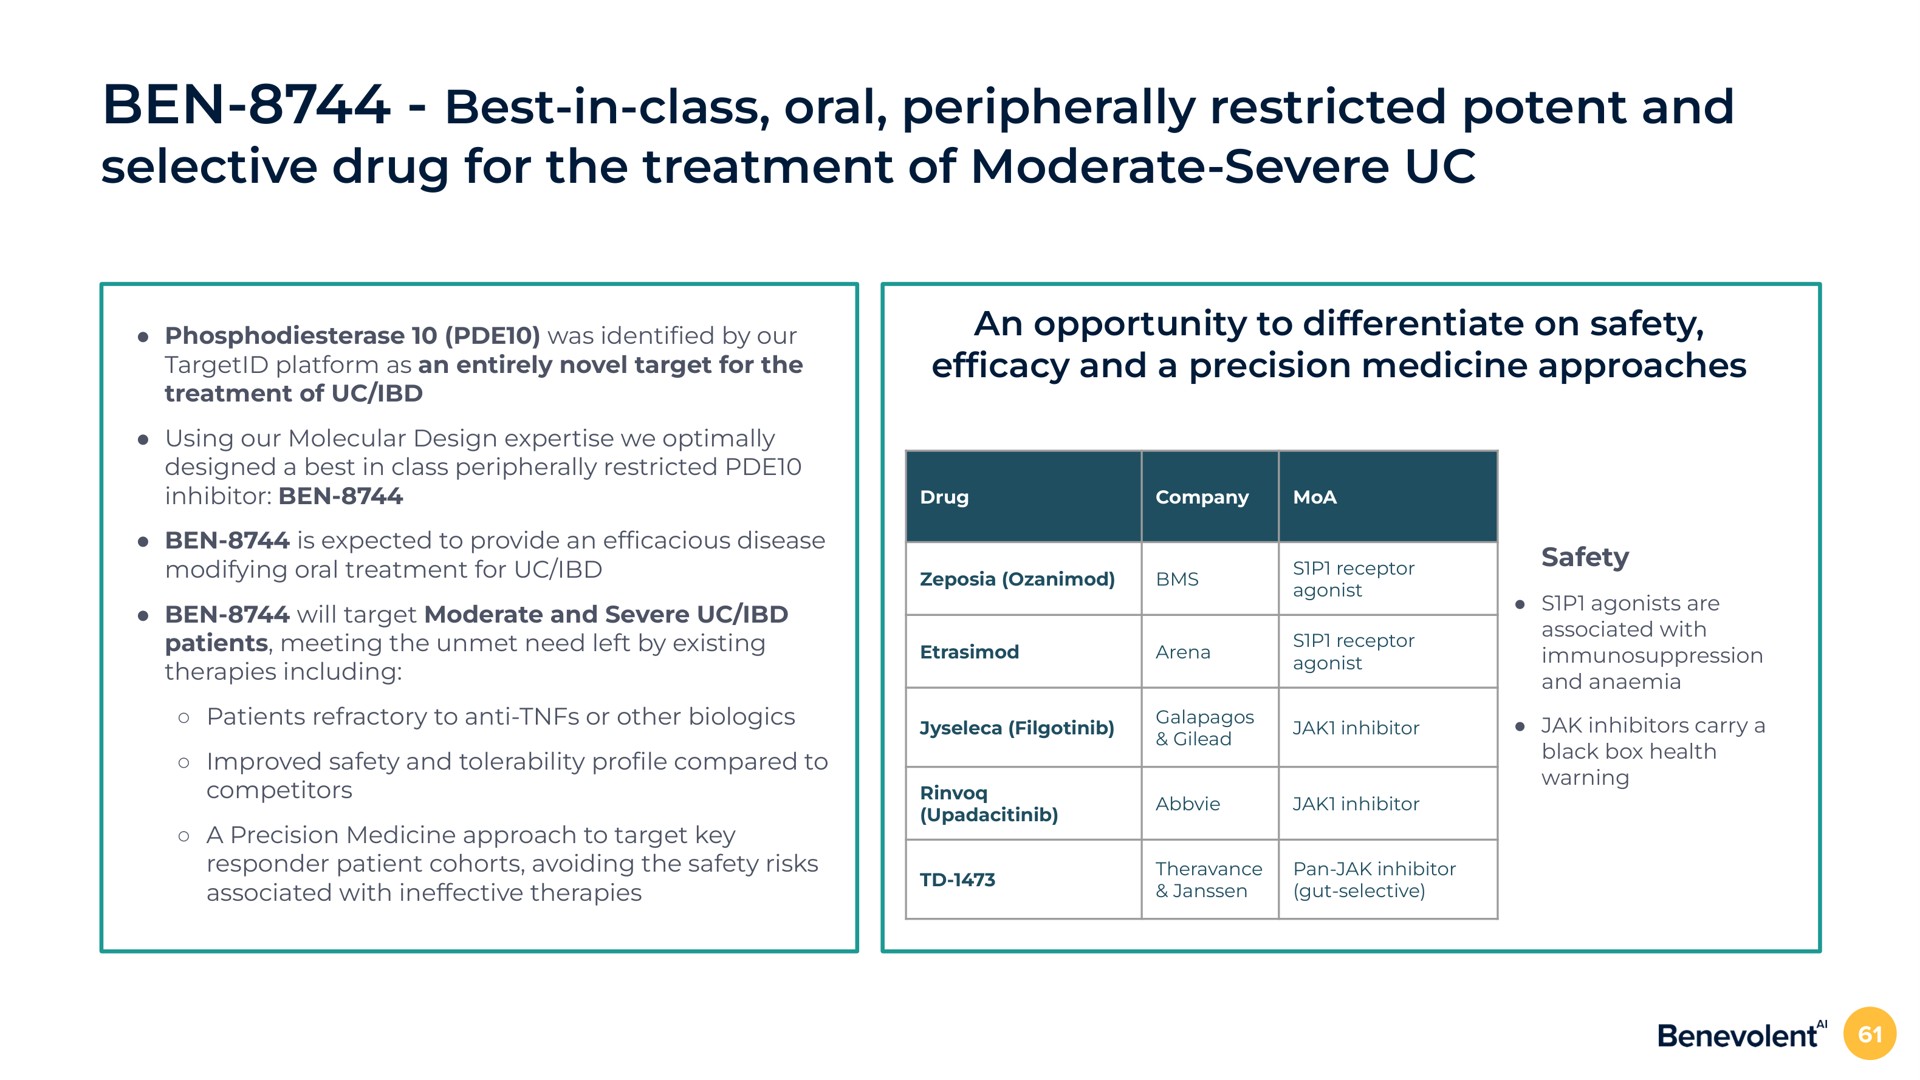 ben best in class oral peripherally restricted potent and selective drug for the treatment of moderate severe an opportunity to differentiate on safety and a precision medicine approaches safety | BenevolentAI